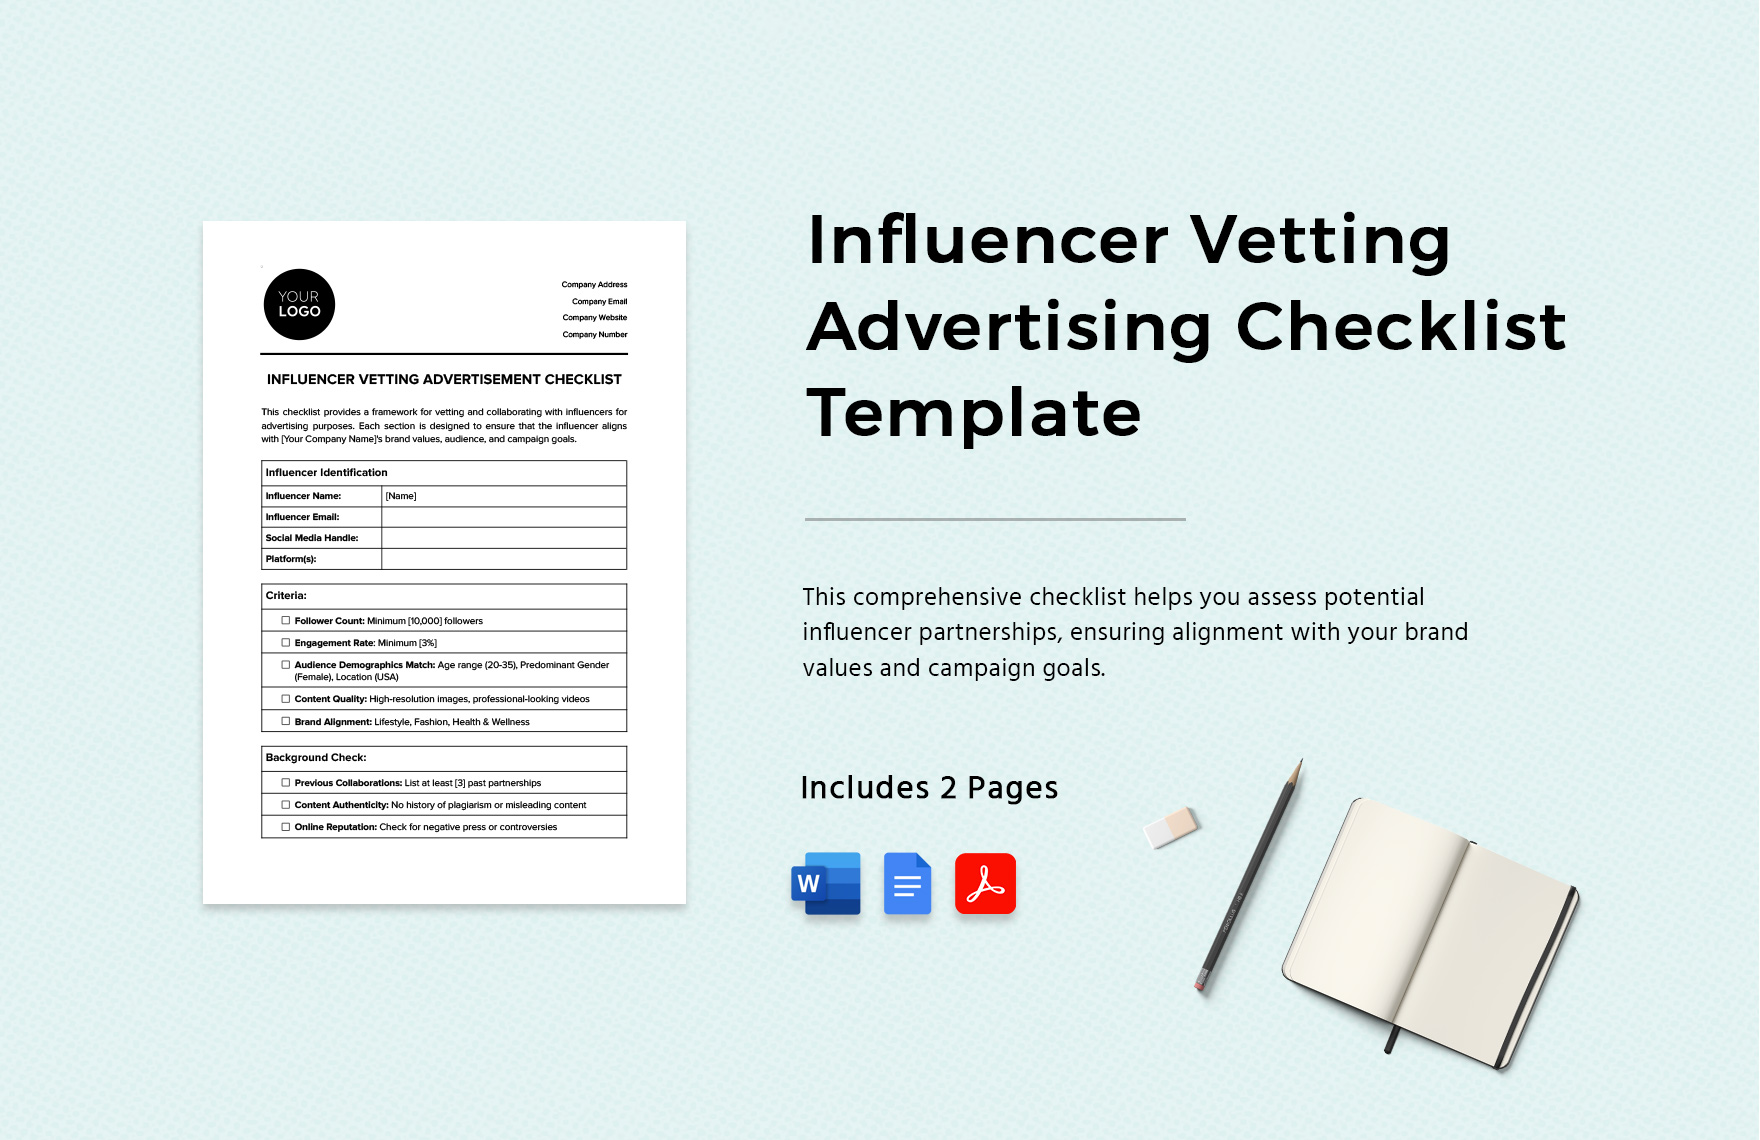 Influencer Vetting Advertising Checklist Template in Word, Google Docs, PDF